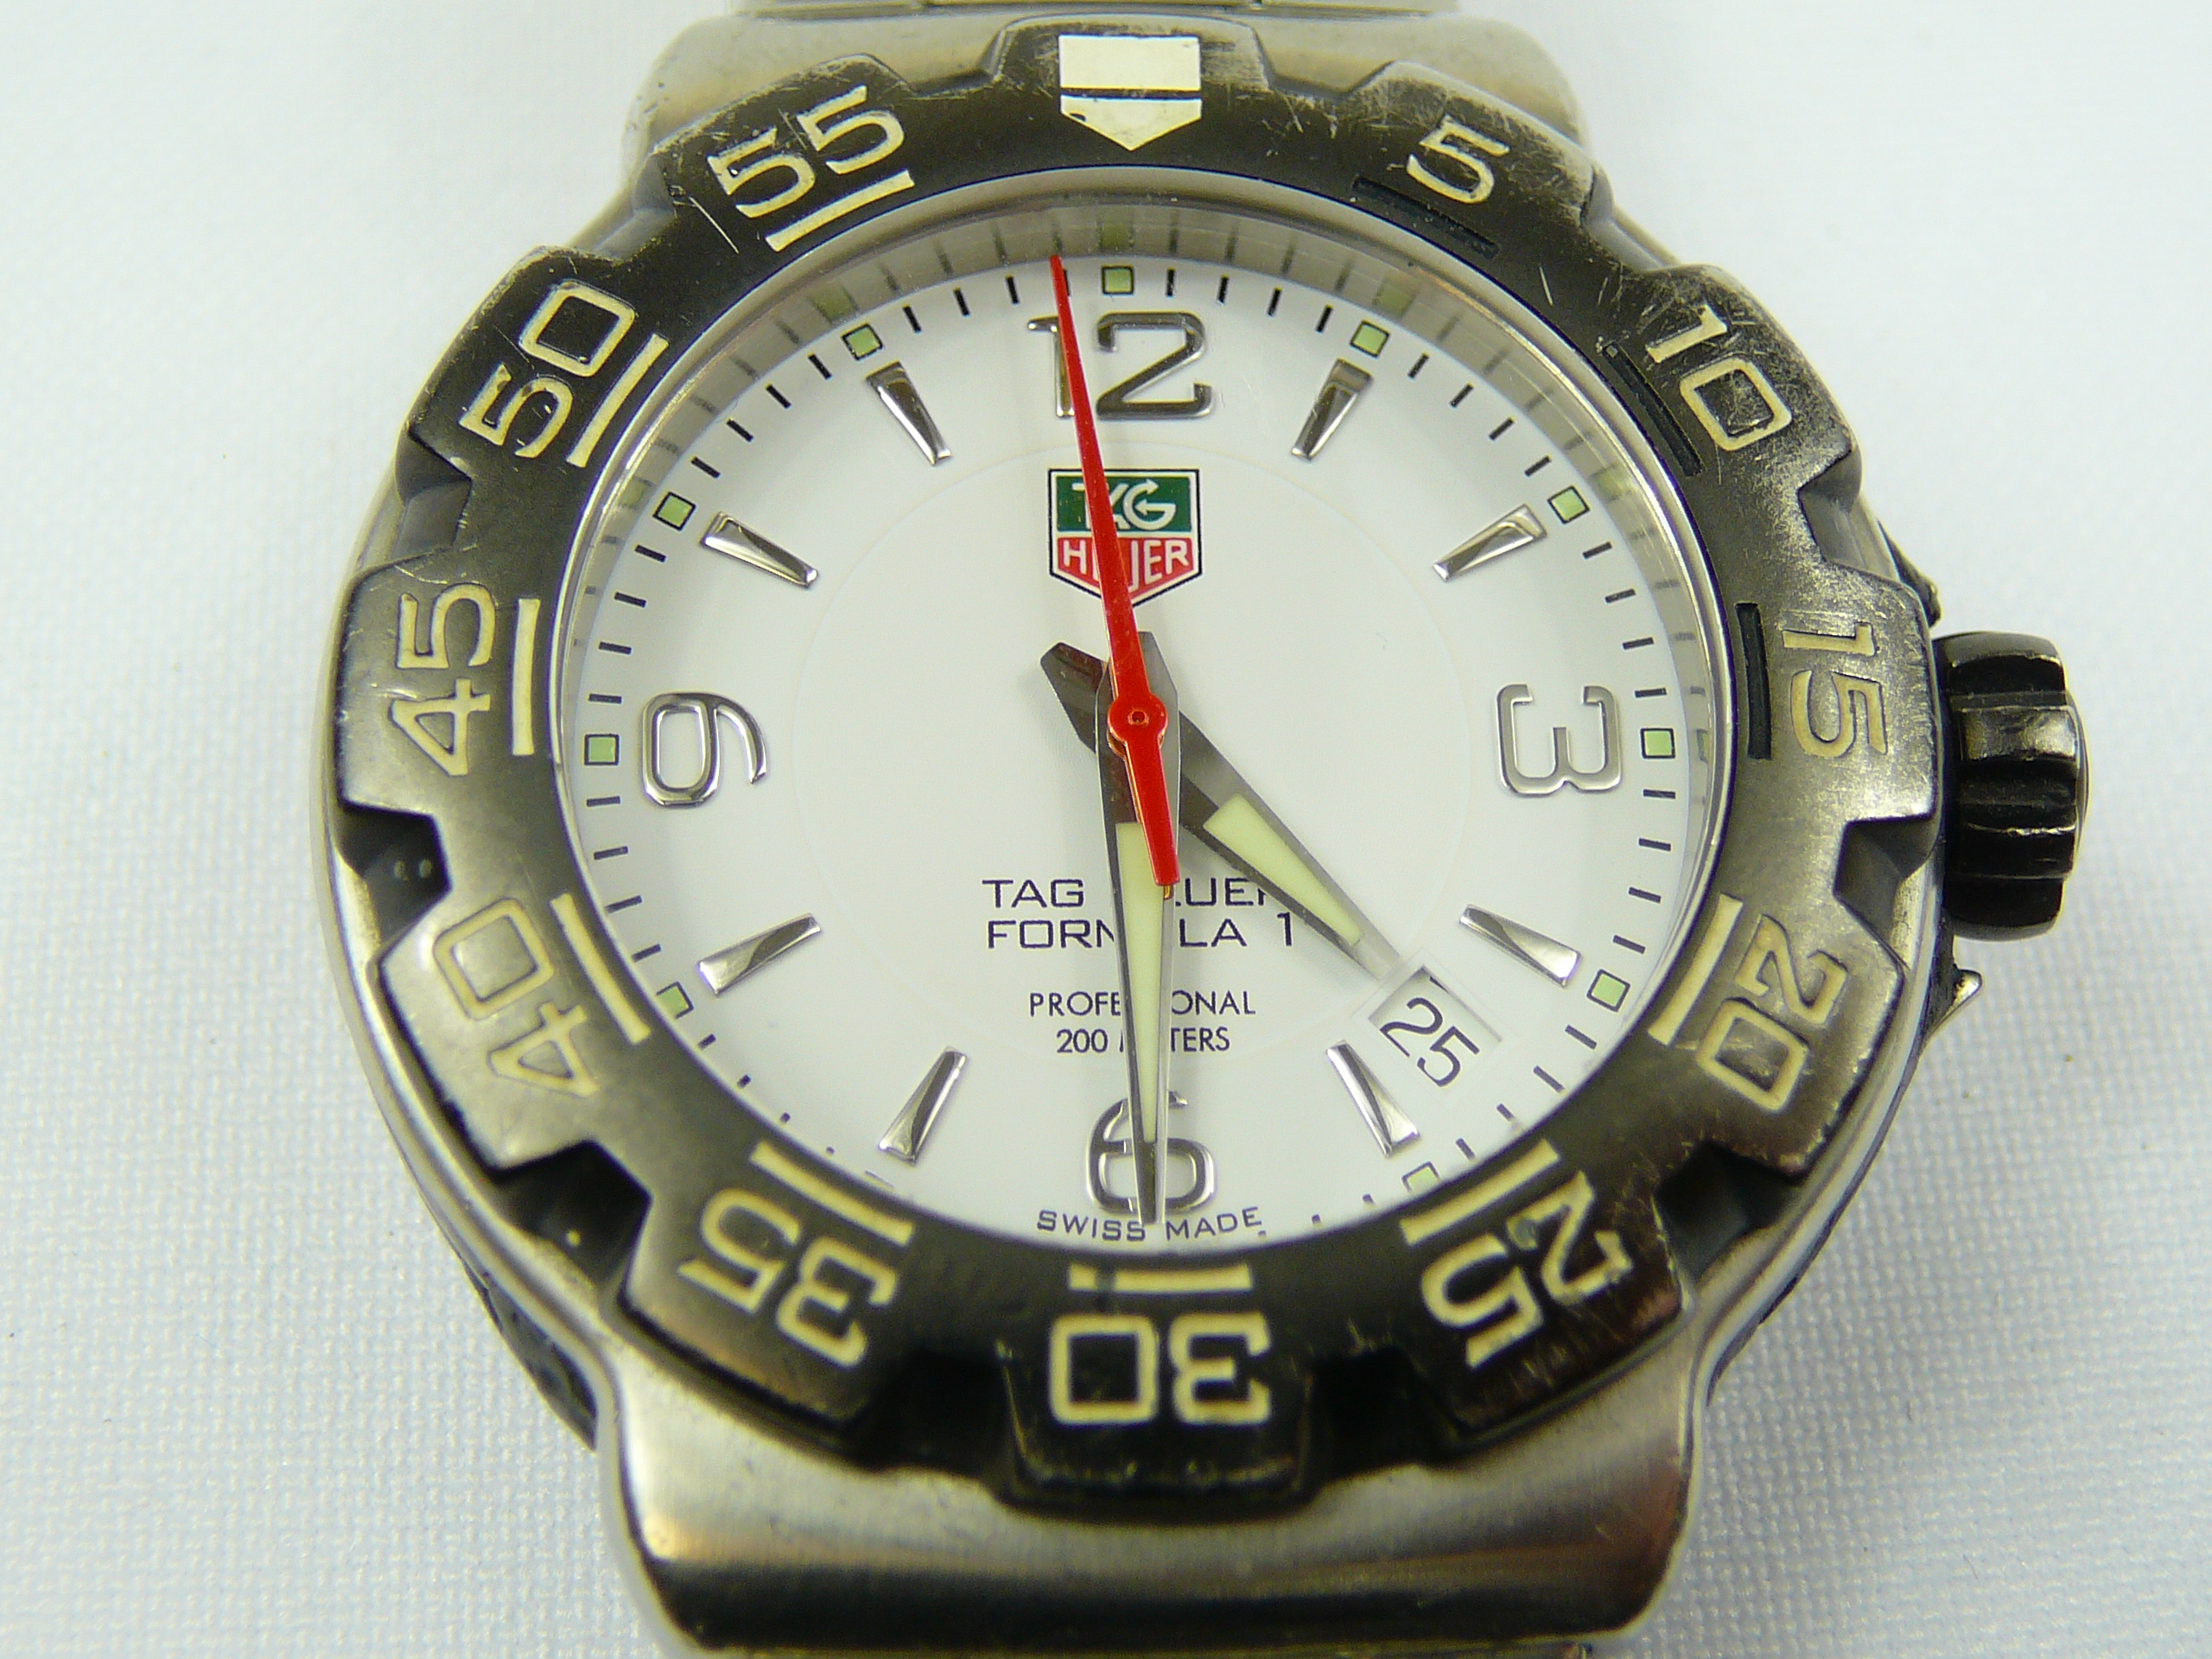 Gents Tag Heuer wrist watch - Image 2 of 4